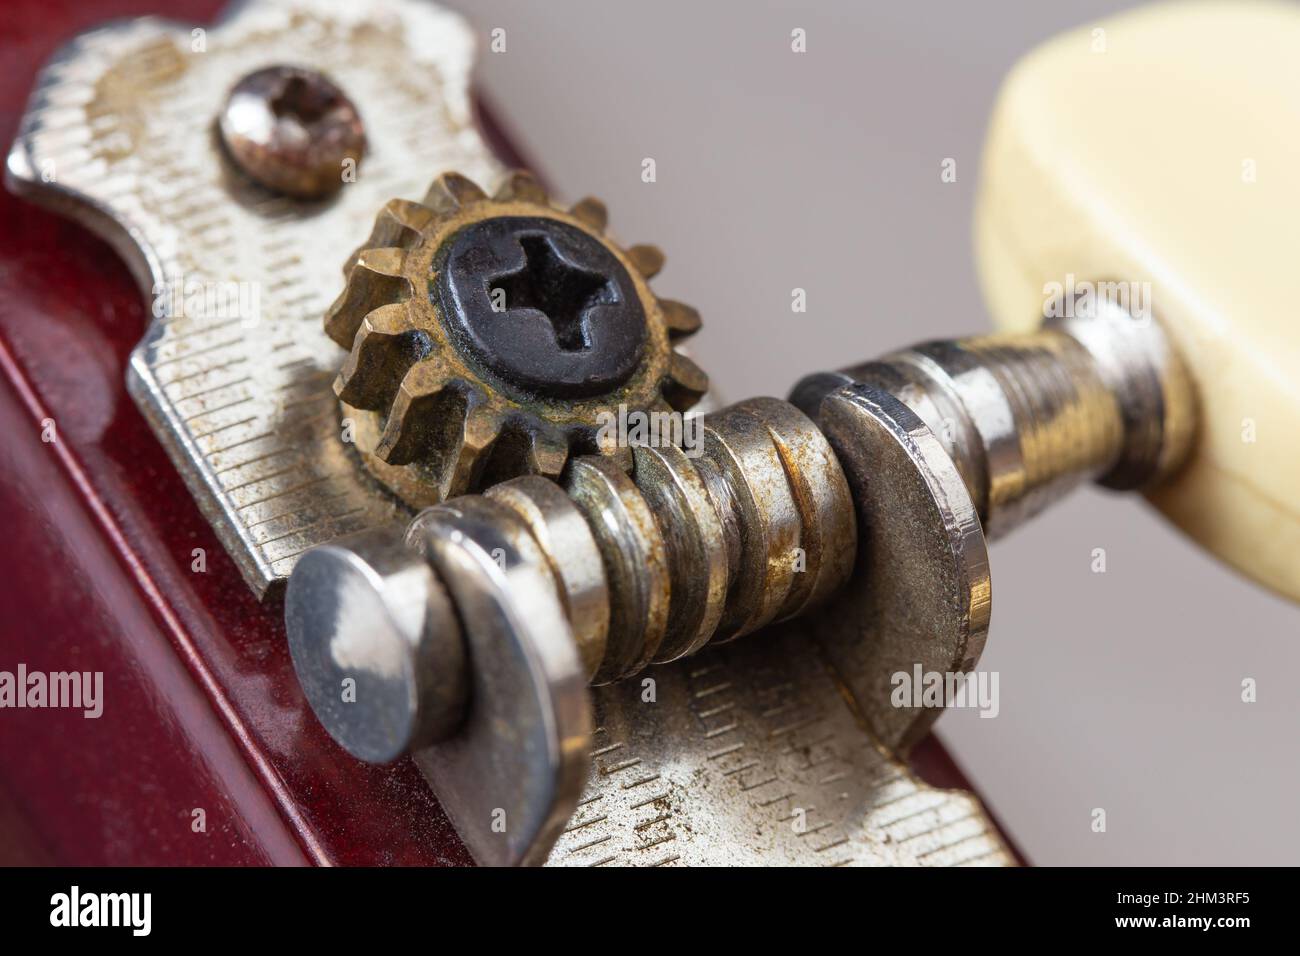 Old tuning peg of a classical guitar. Macro photography. Stock Photo